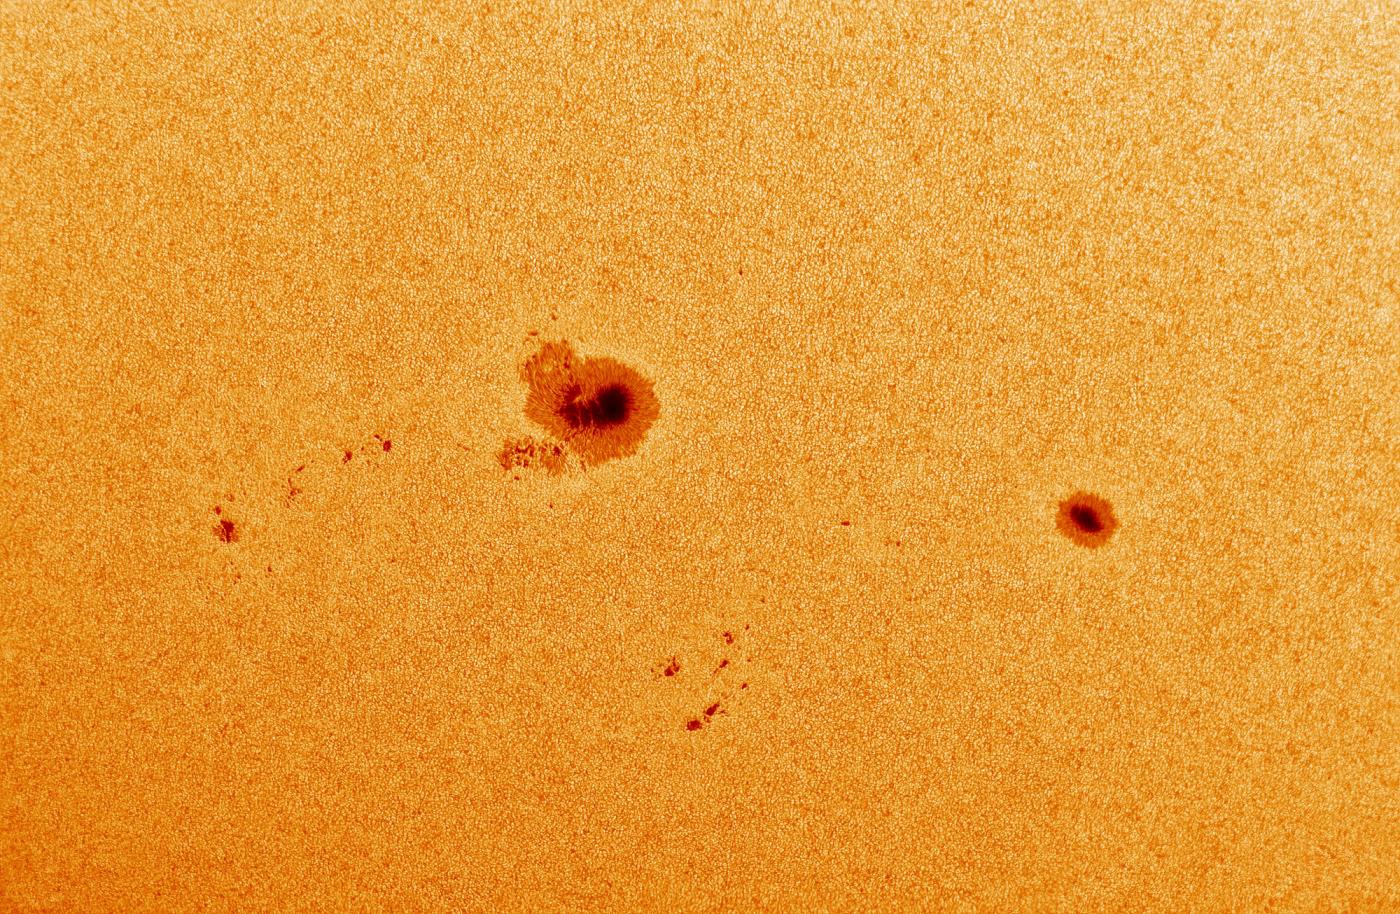 An image showing 'Sunspots AR2786 and AR2785'